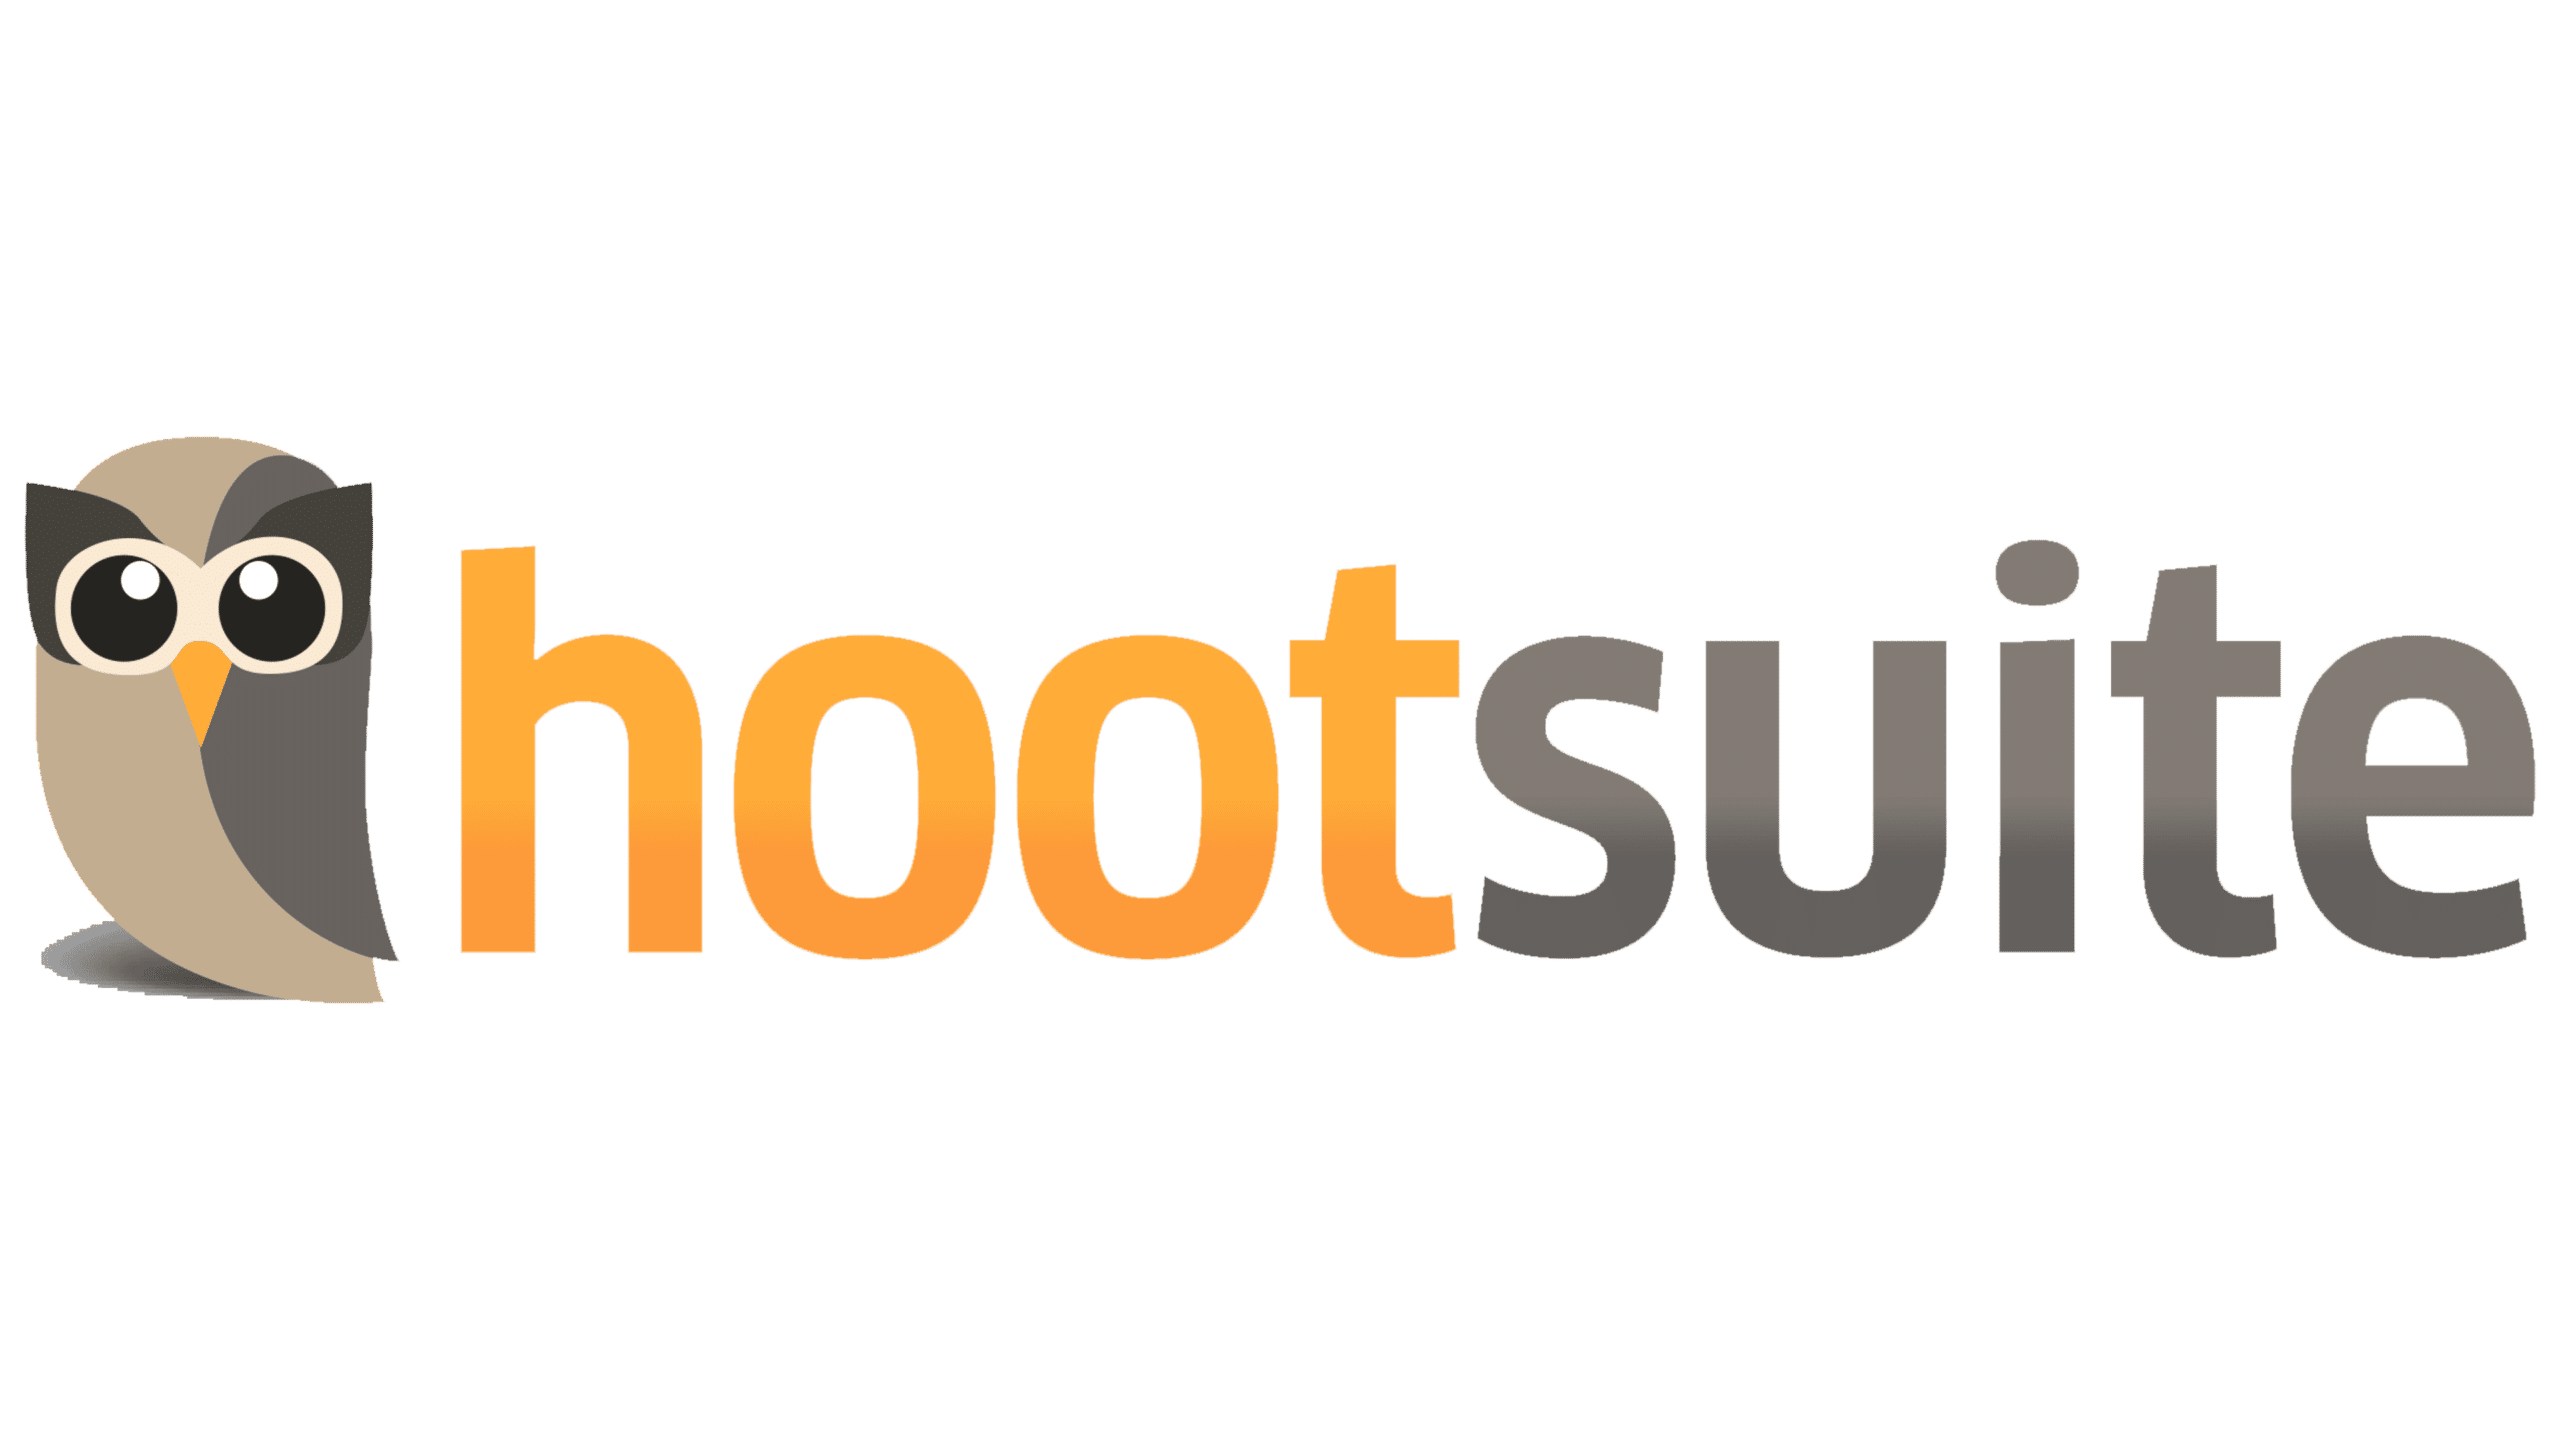 Pictory in partnership with Hootsuite